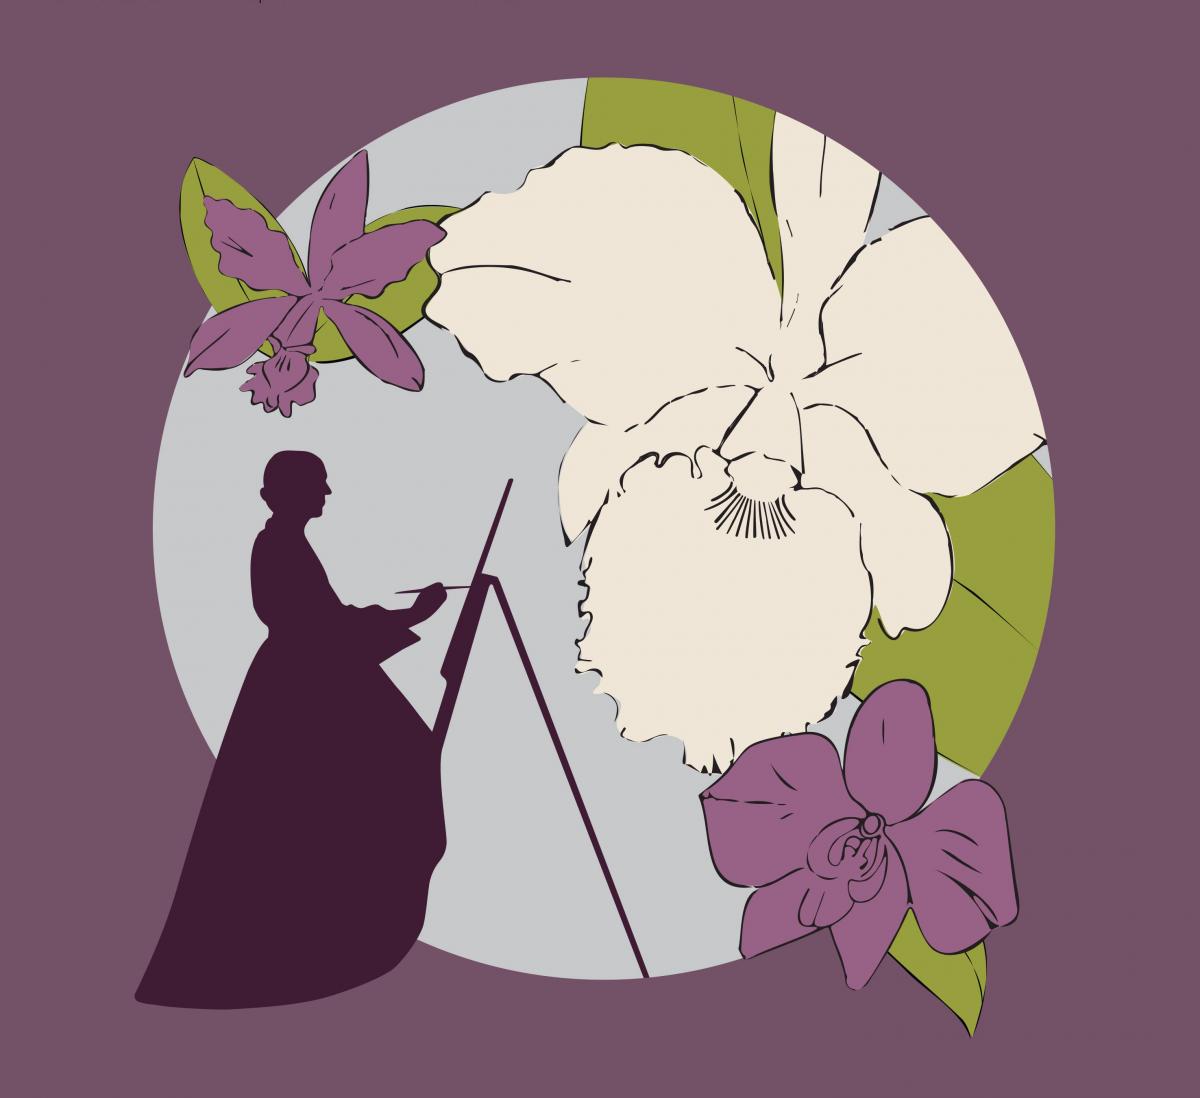 A silhouette of a woman standing in front of orchids is shown